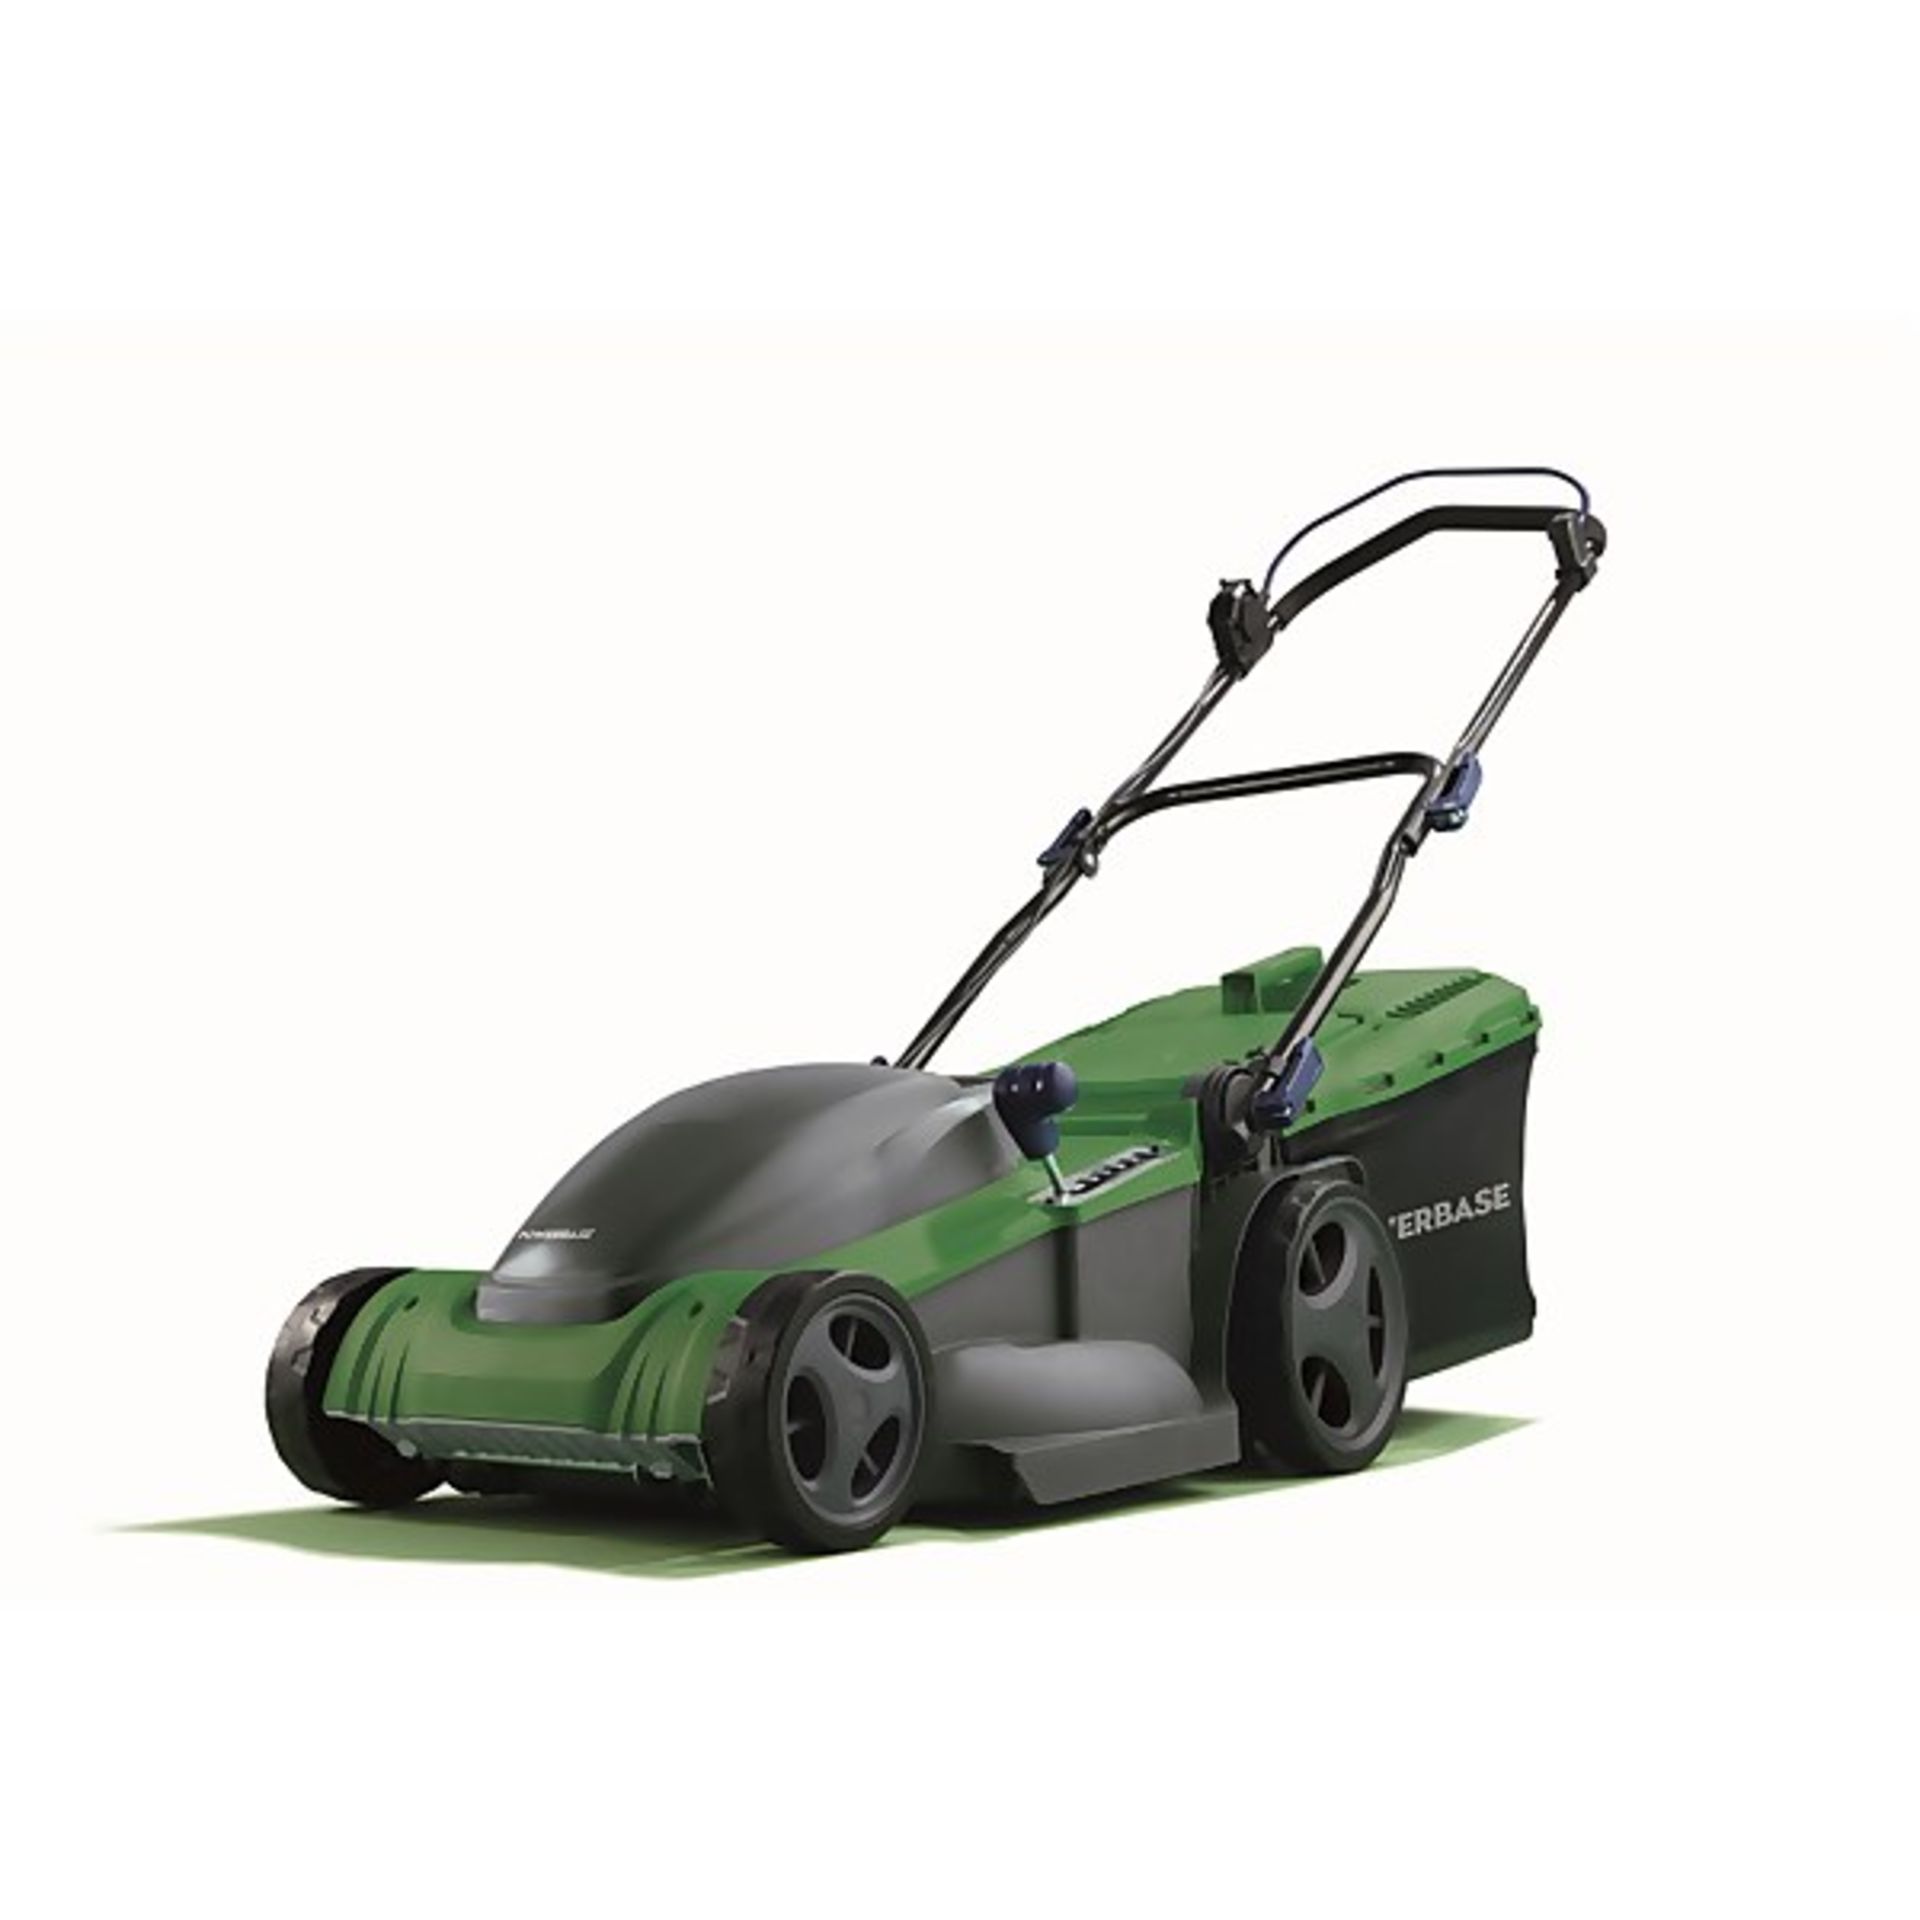 (R6E) 2 Items. 1x Powerbase 41cm 1800W Electric Rotary Lawn Mower & 1x Sovereign 30cm Push Cylind